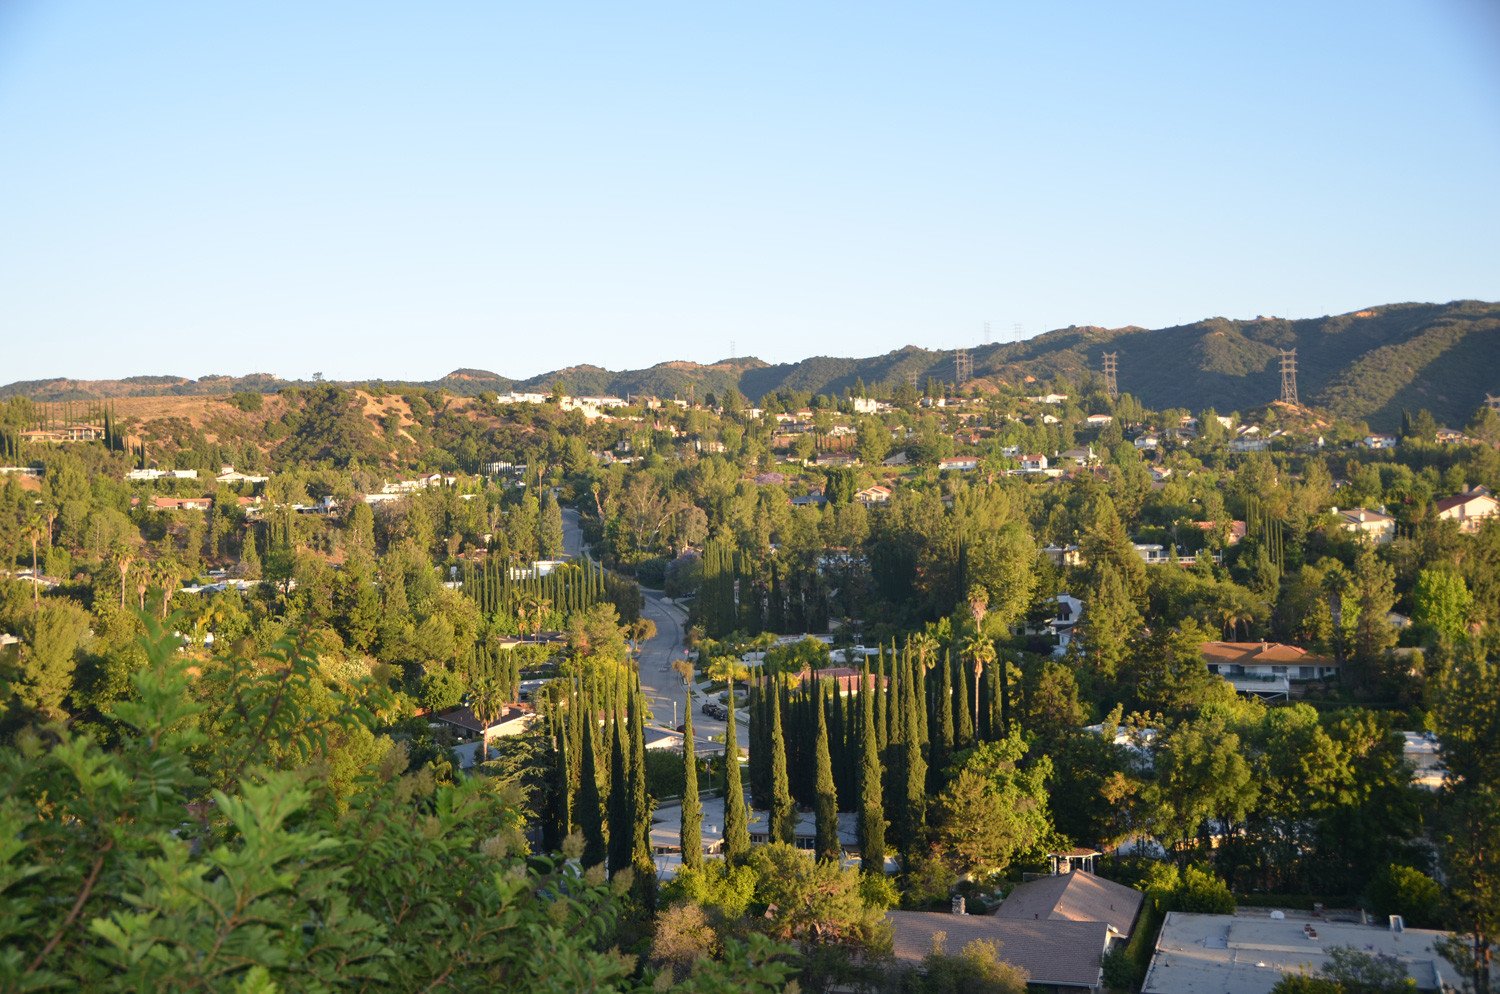 view of the San Fernando valley from the Encino hills